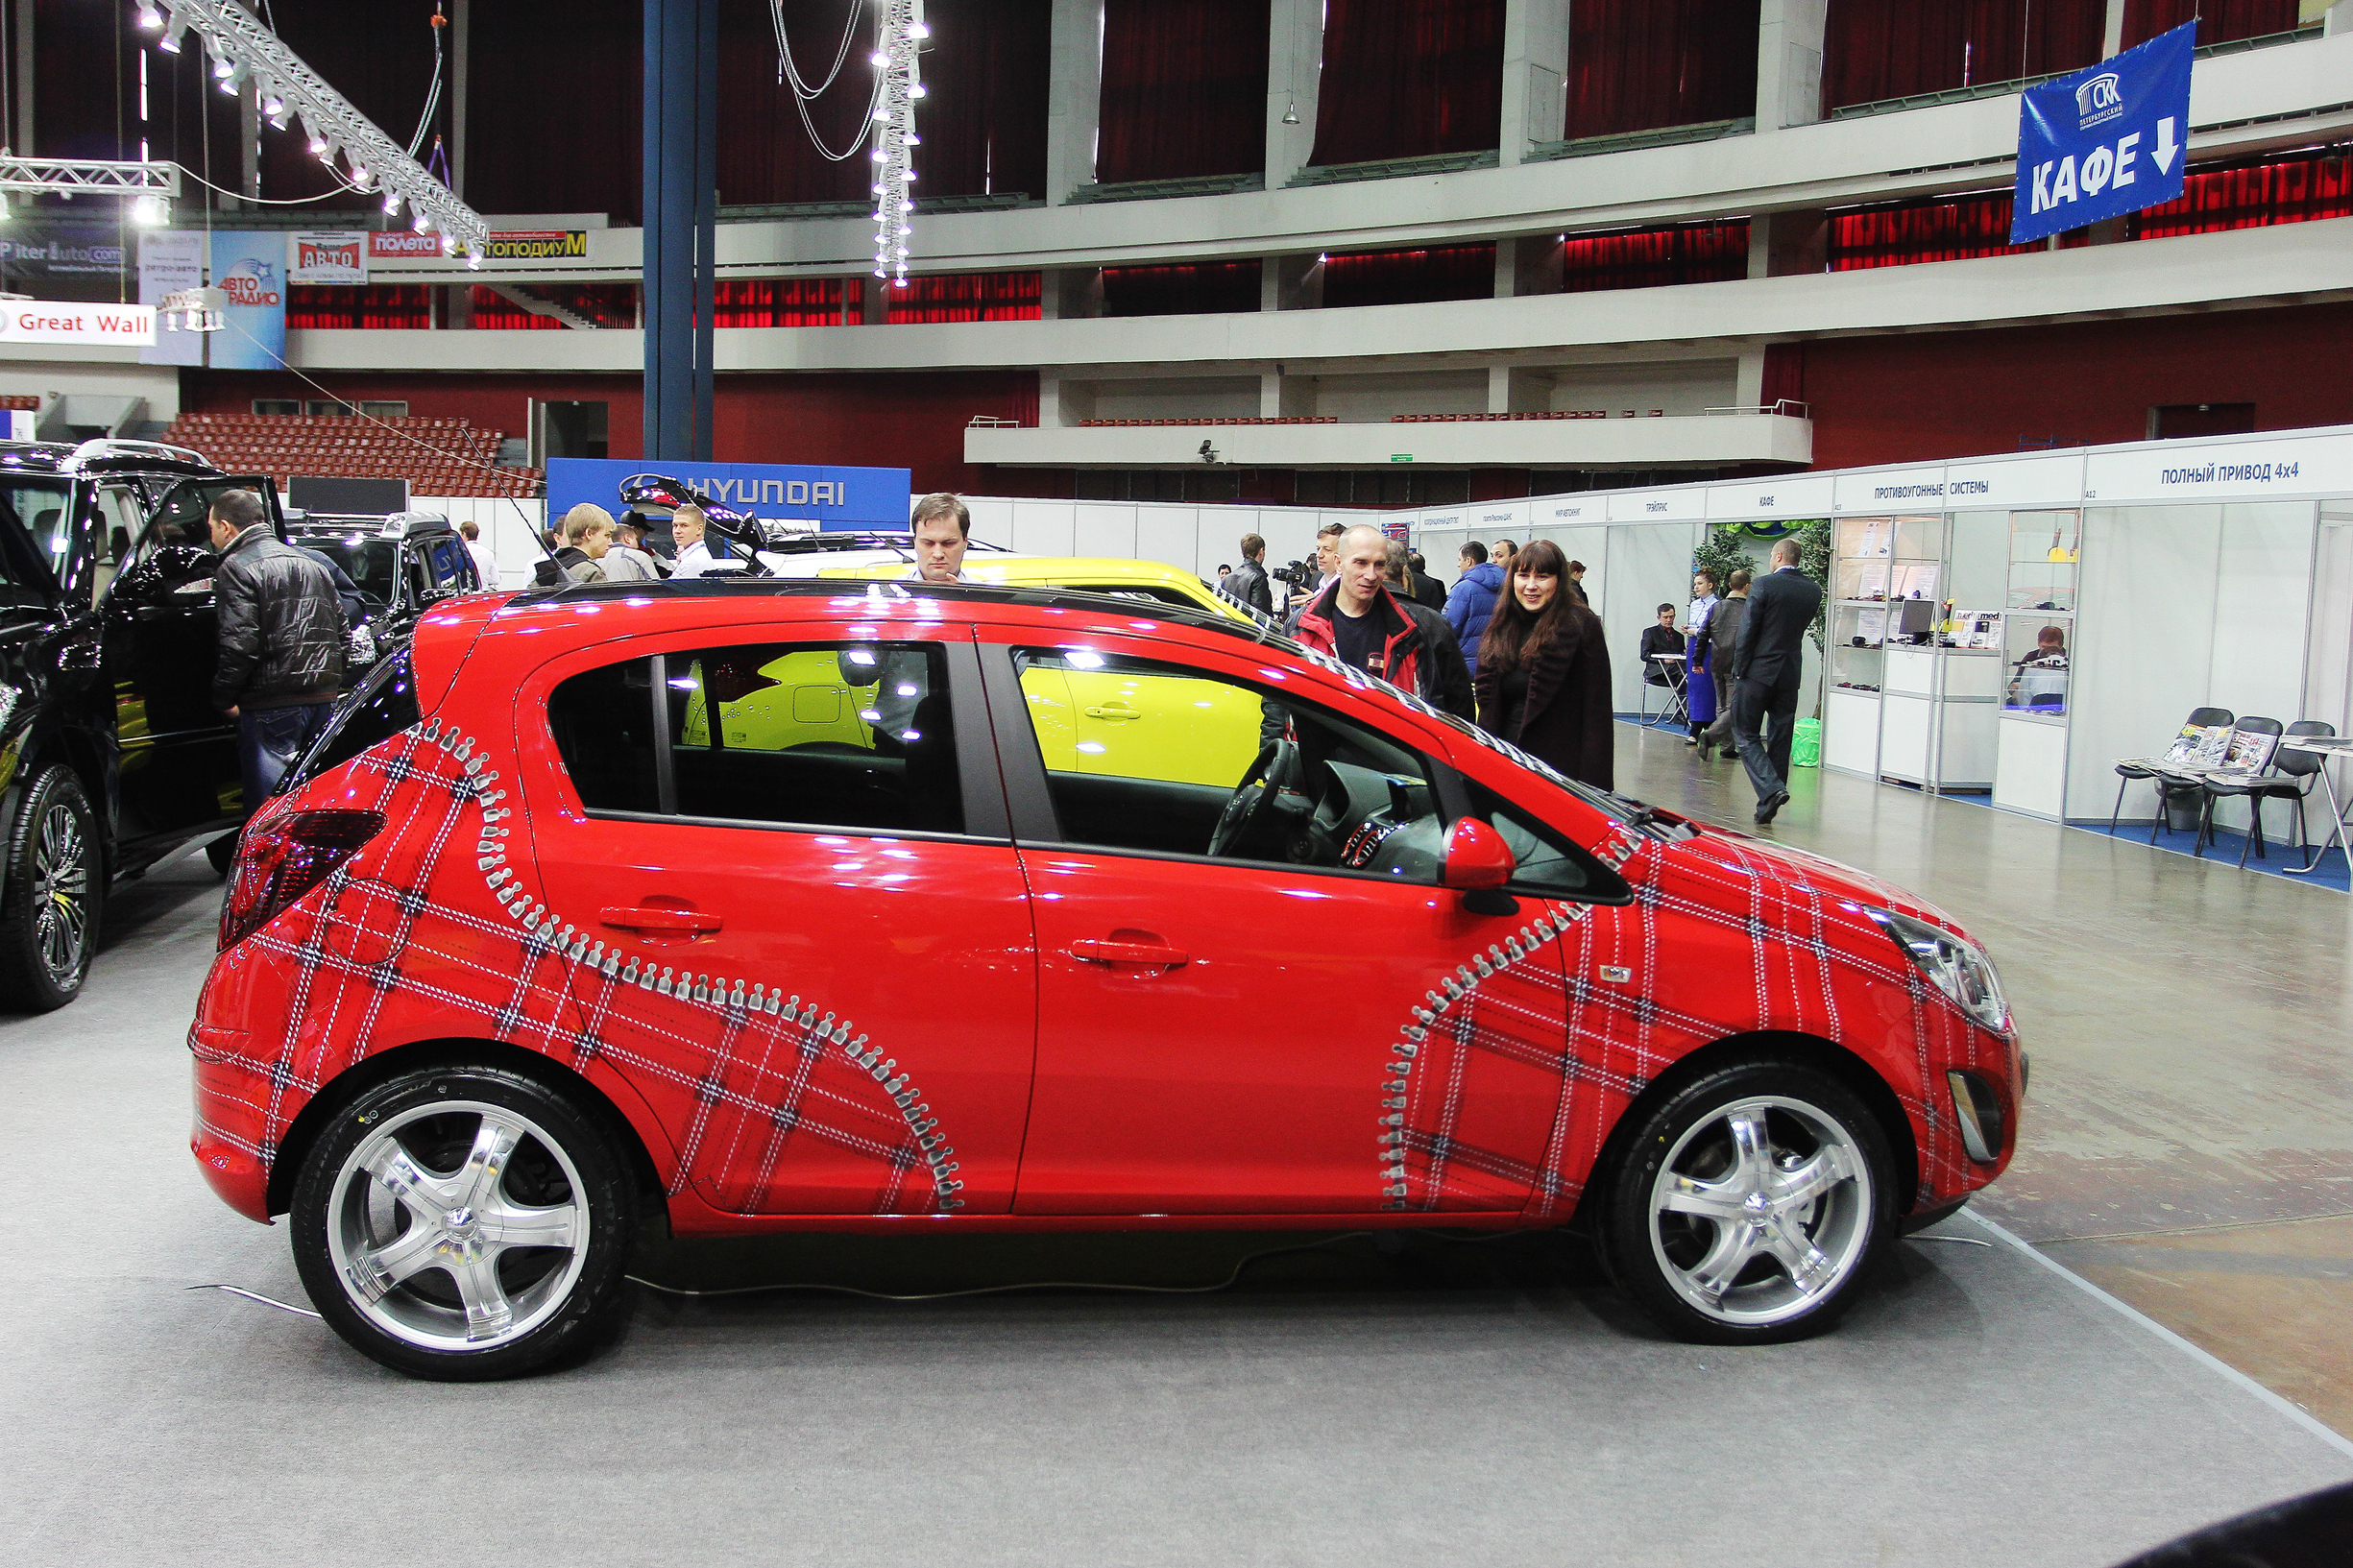 ST. PETERSBURG, RUSSIA - APRIL, 5: OPEL CORSA WITH AEROGRAPHY PICTURE IS ON DISPLAY AT "AUTOMOBILE WORLD-2012 " ANNUAL CAR EXHIBITION ON APRIL, 5, 2012 IN ST.PETERSBURG, RUSSIA. BY UATP1